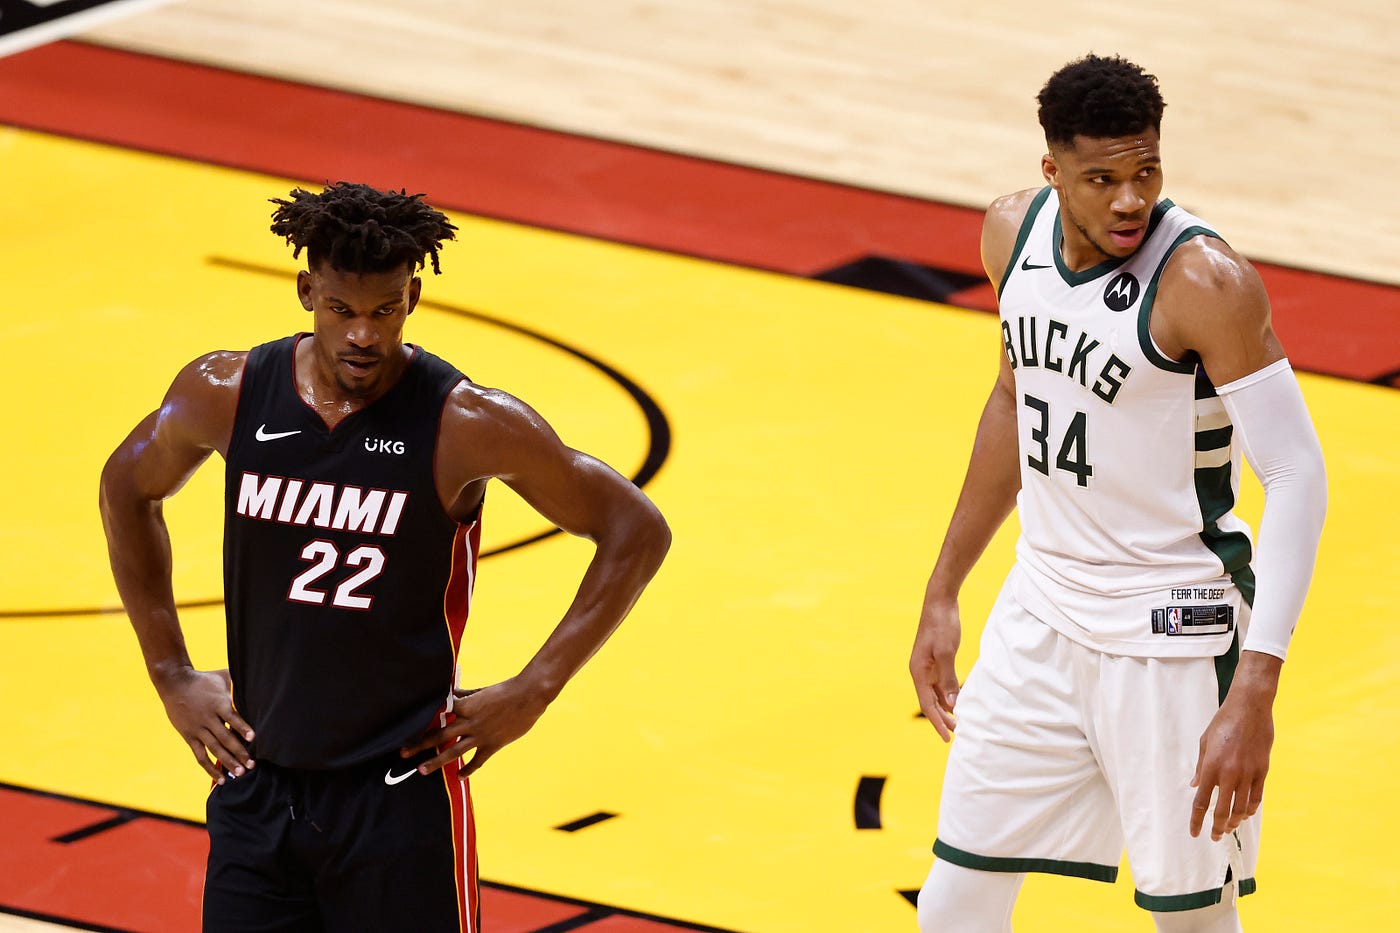 Greatest Risers and Fallers in the NBA Playoffs, by James Pavlicek